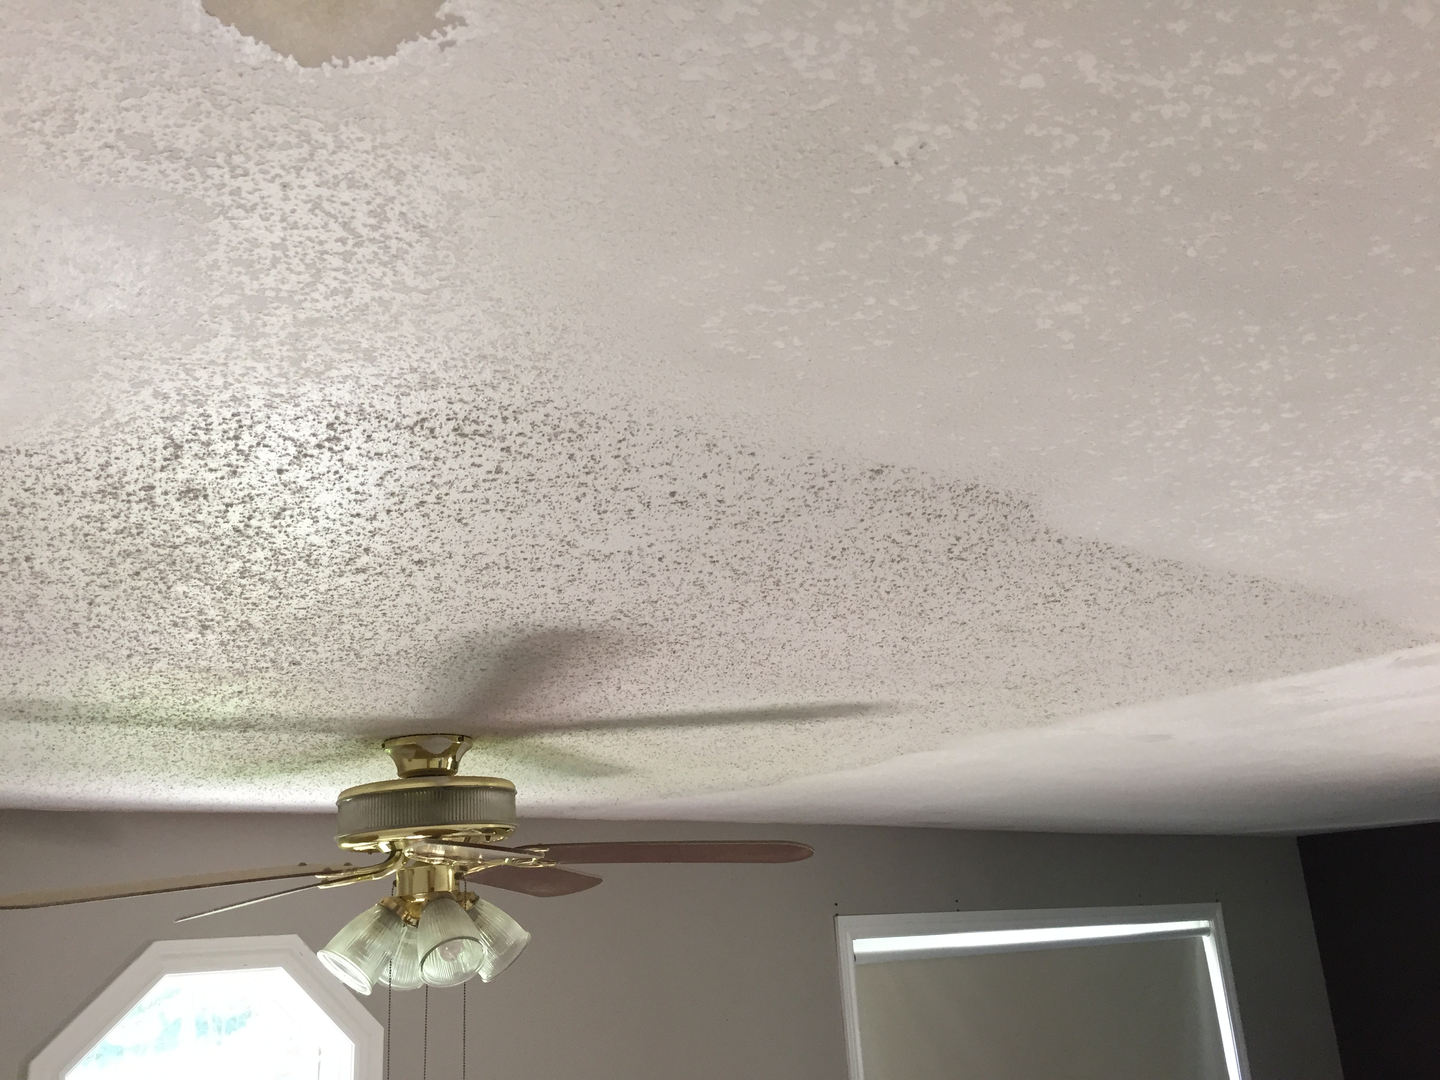 Stipple Ceiling Popcorn Ceiling Removal Company In Toronto Gta